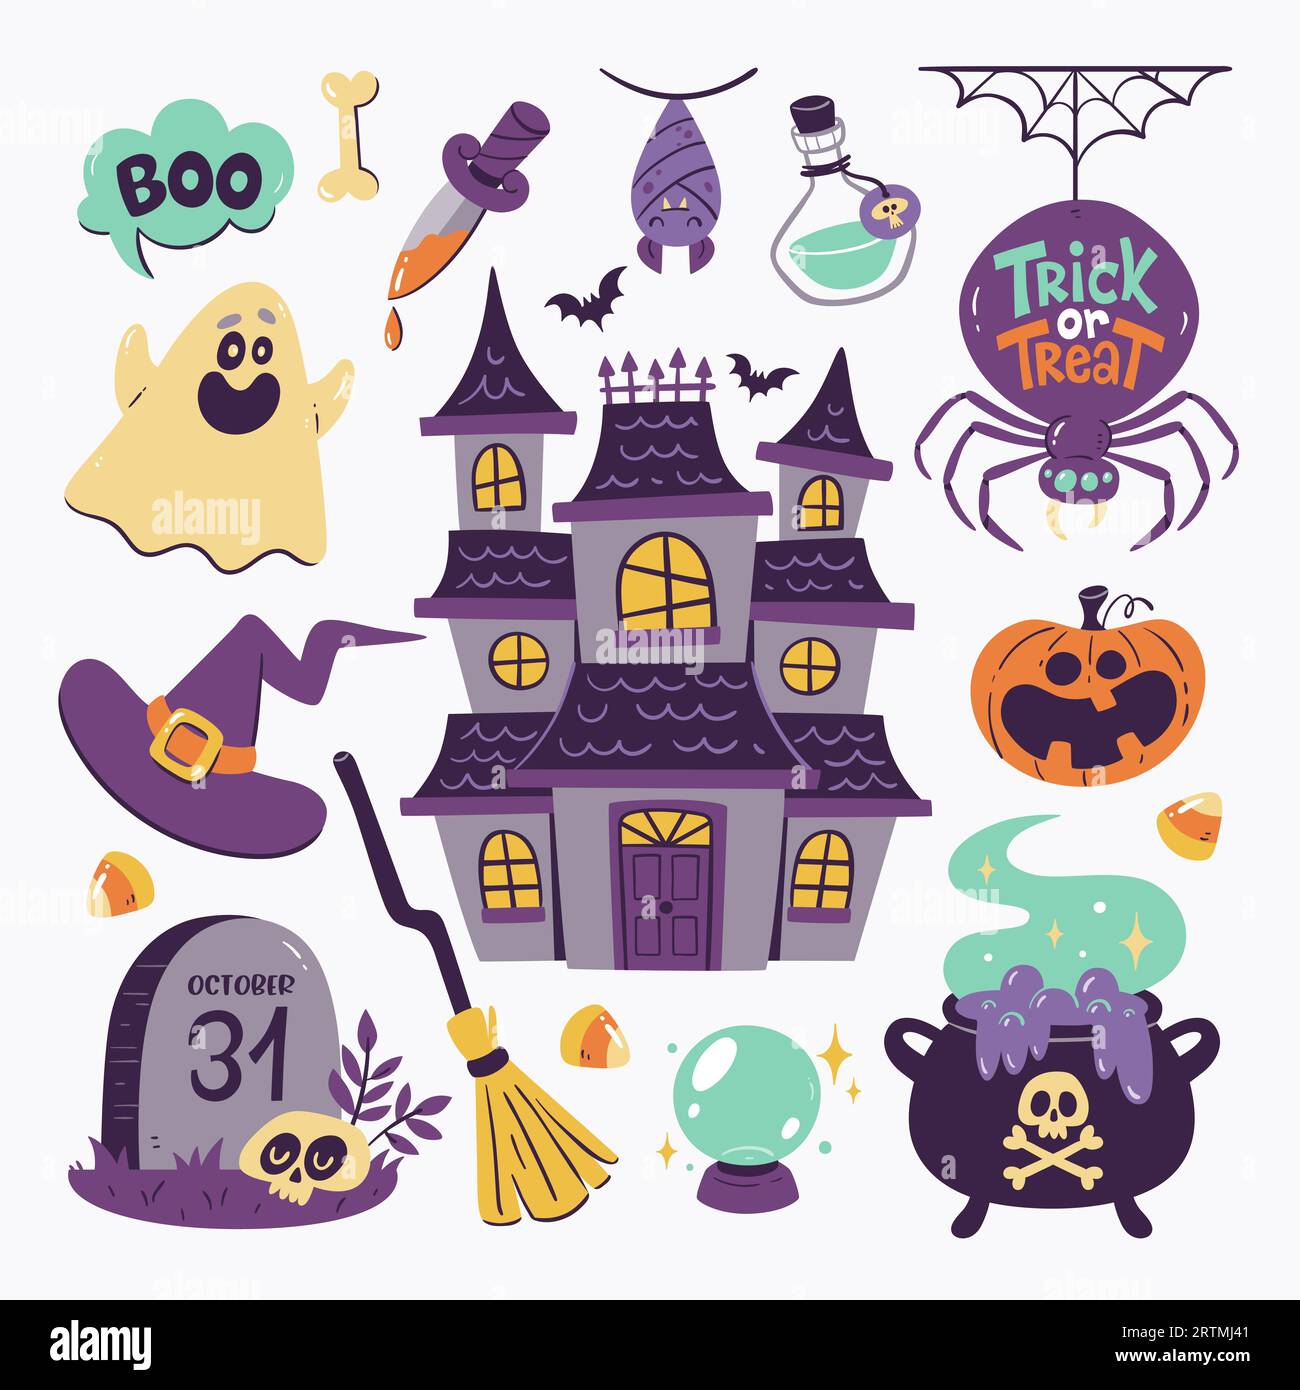 Cute Halloween illustration with 15 isolated colorful cliparts. Creepy halloween elements to celebrate a spooky night: A haunted house, a funny ghost, Stock Vector